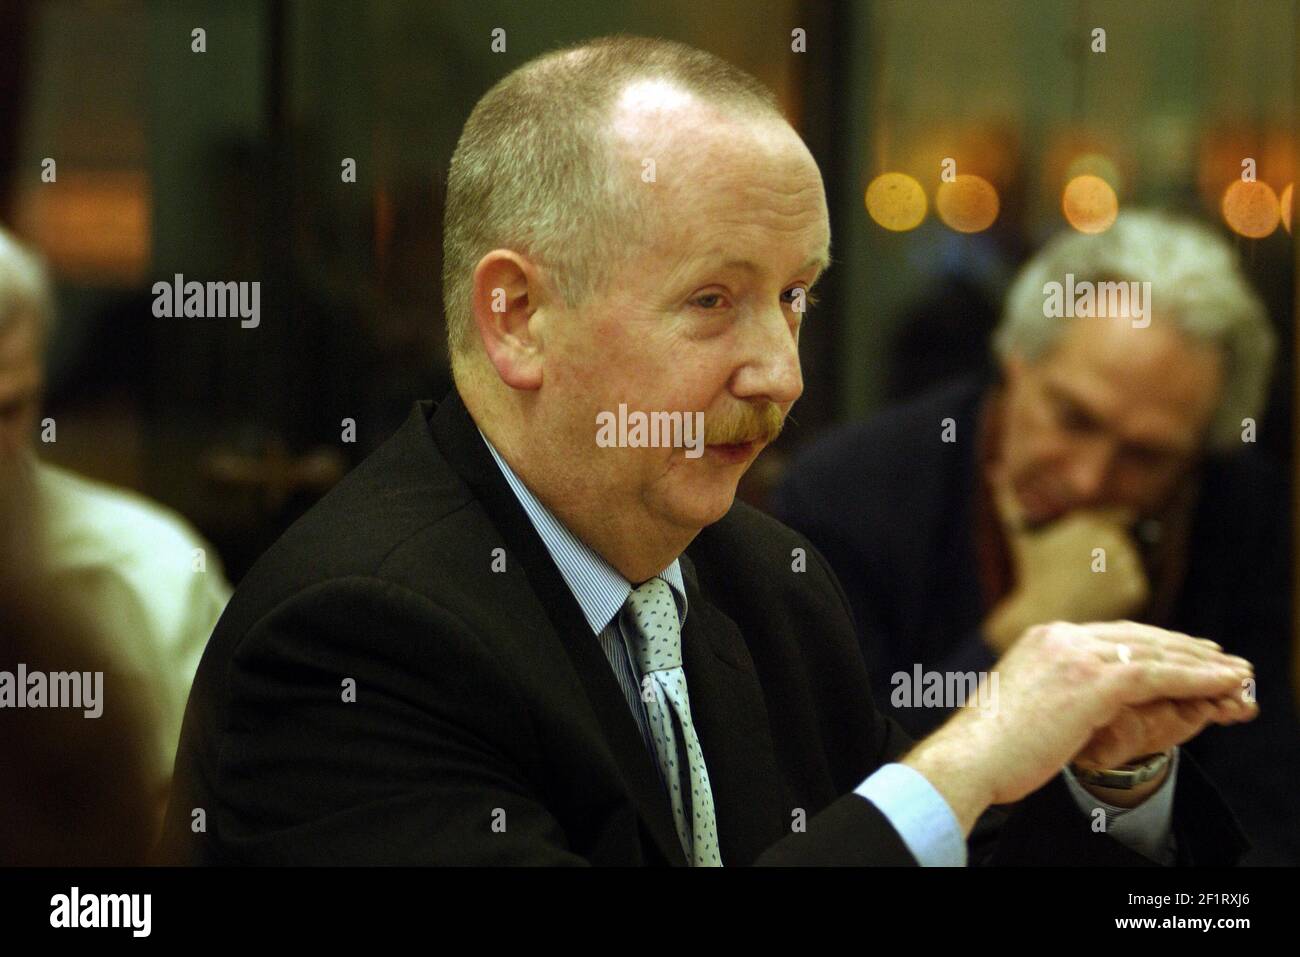 PROFESSOR OF HUMAN RIGHTS AND INTERNATIONAL LAW AT LONDON MET UNIVERSITY BILL BOWRING SPEAKING TO JOURNALISTS ABOUT A REPORT INTO THE UK GOVERNMENTS LIABILITY FOR WAR CRIMES DURING THE IRAQ CONFLICT.20/1/04 PILSTON Stock Photo